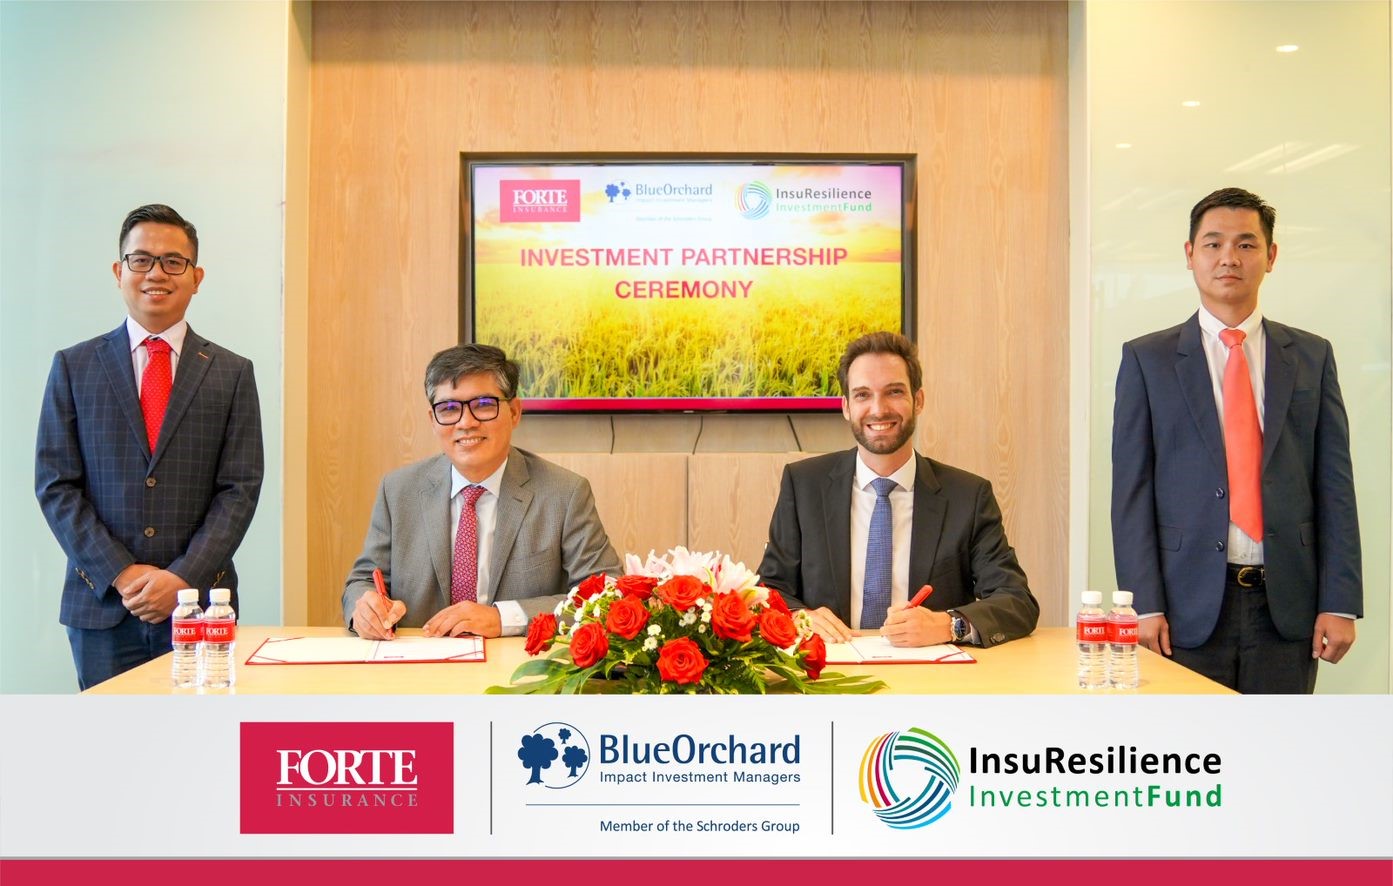 Forte enters into investment partnership with BlueOrchard to develop Cambodia’s agri-insurance sector